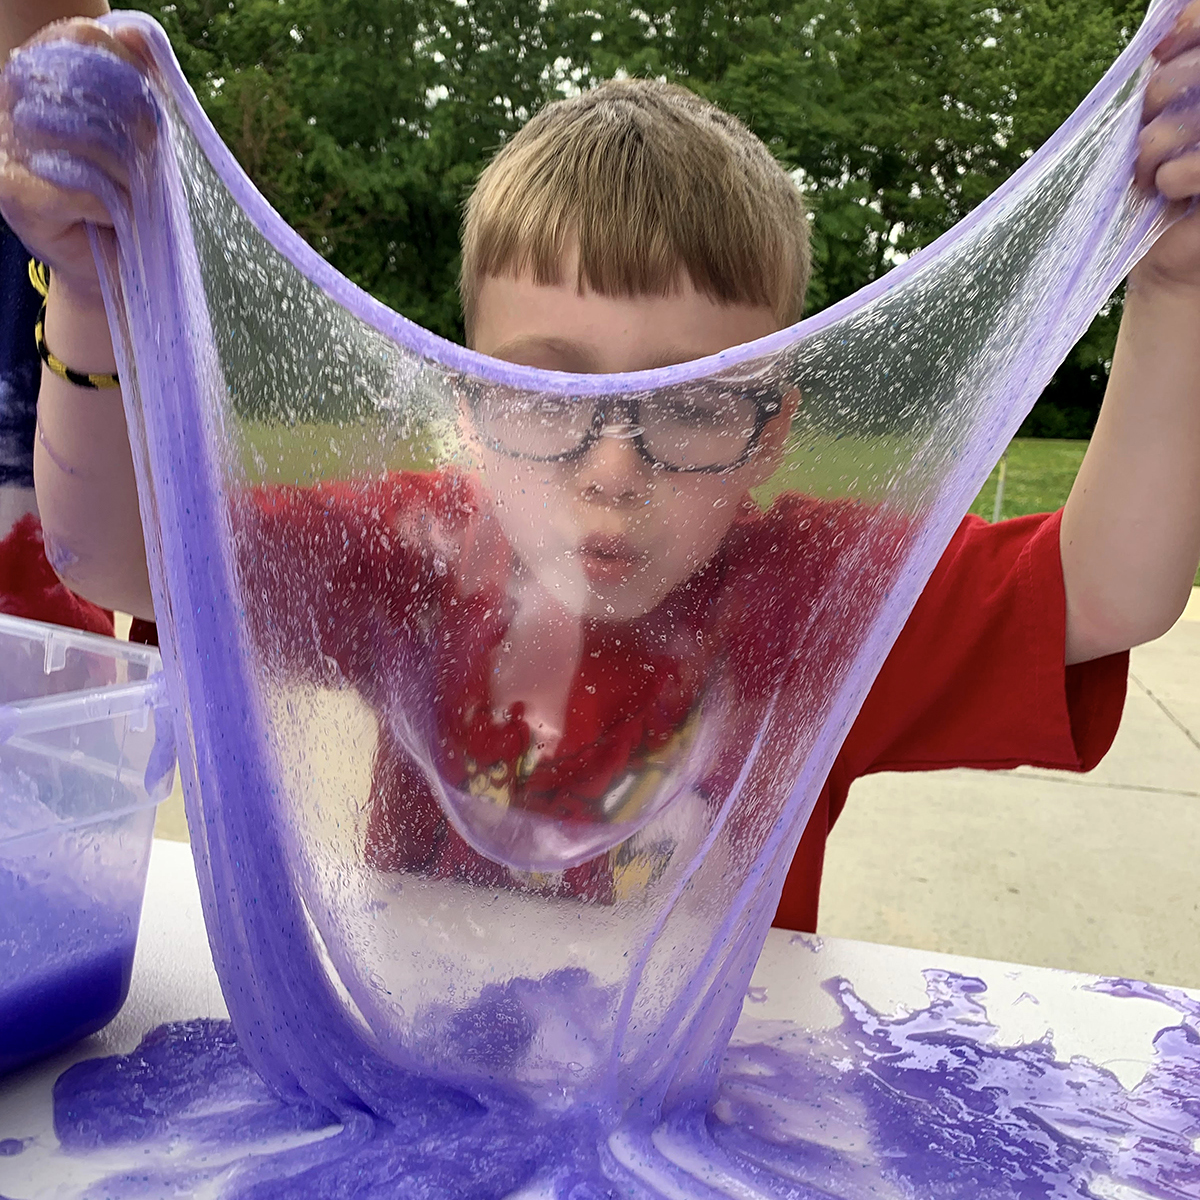 Child in a red shirt blows a bubble in purple slime outside